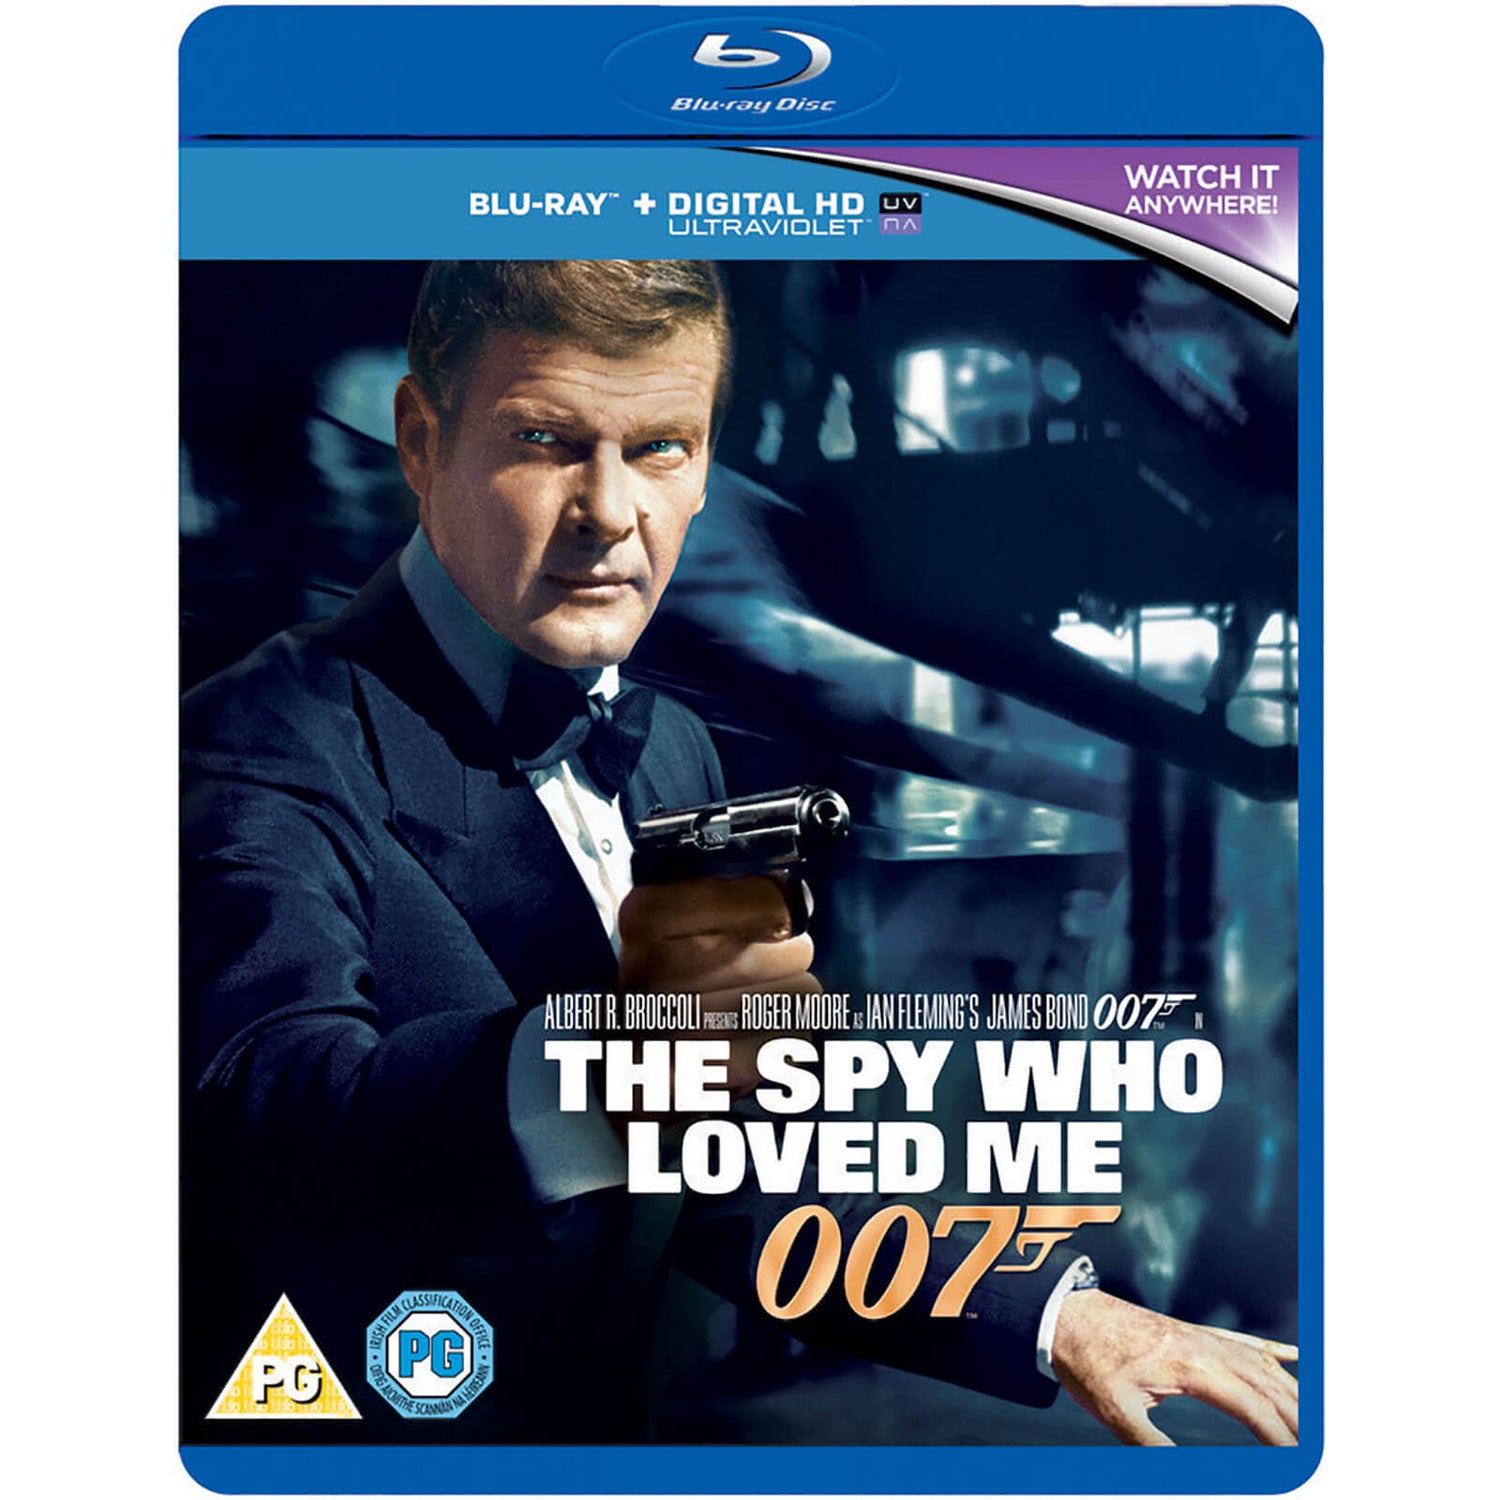 The Spy Who Loved Me (Includes HD UltraViolet Copy)